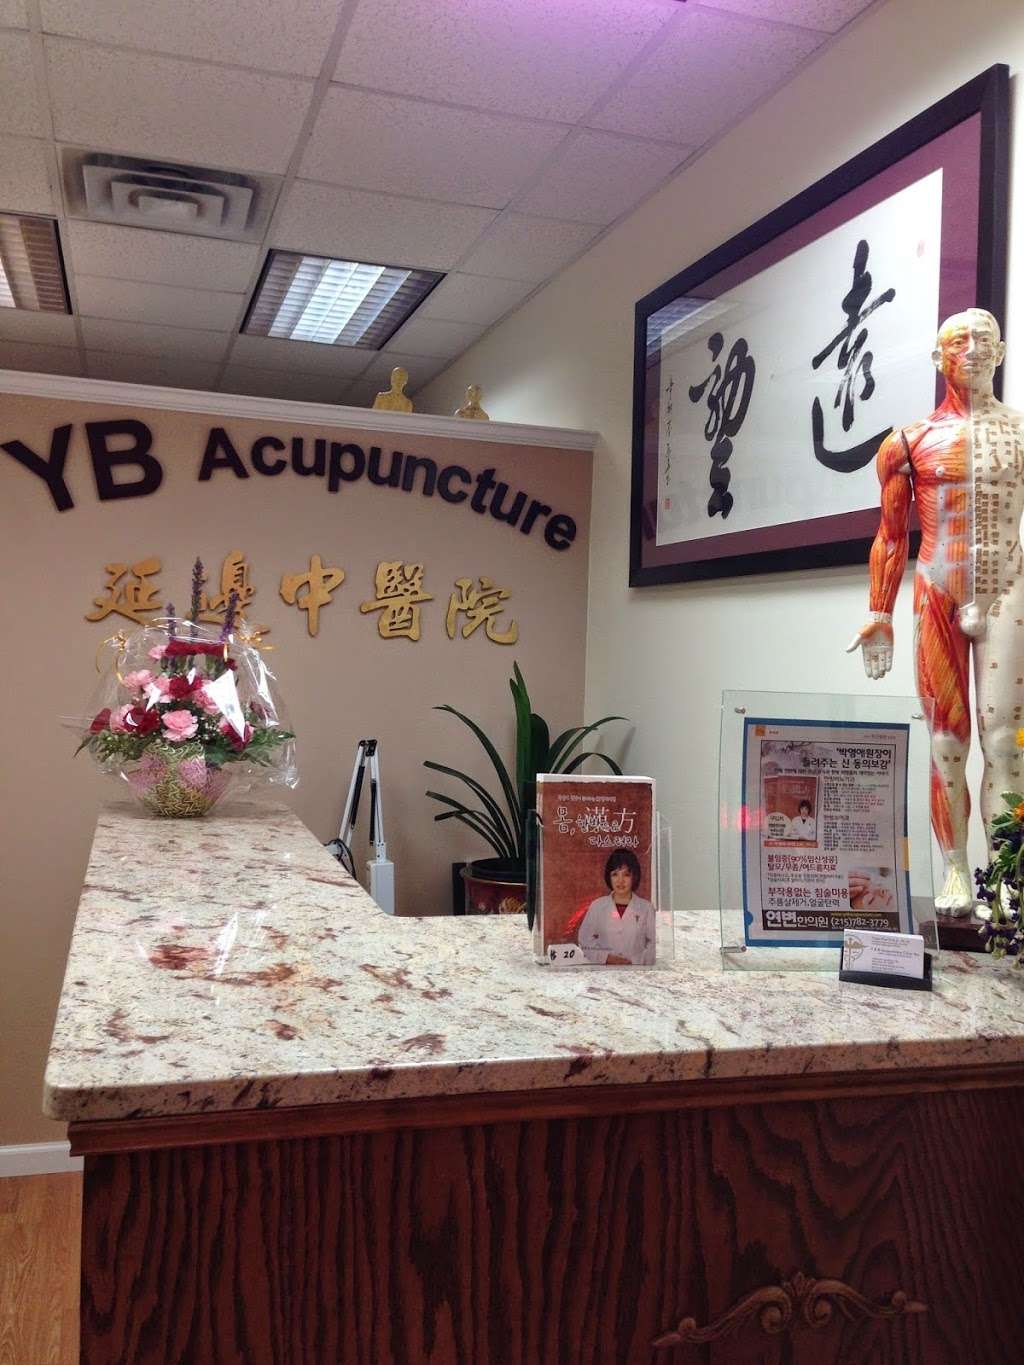 Y B Acupuncture Clinic Inc | 7300 Old York Rd #202, Elkins Park, PA 19027, USA | Phone: (215) 782-3779